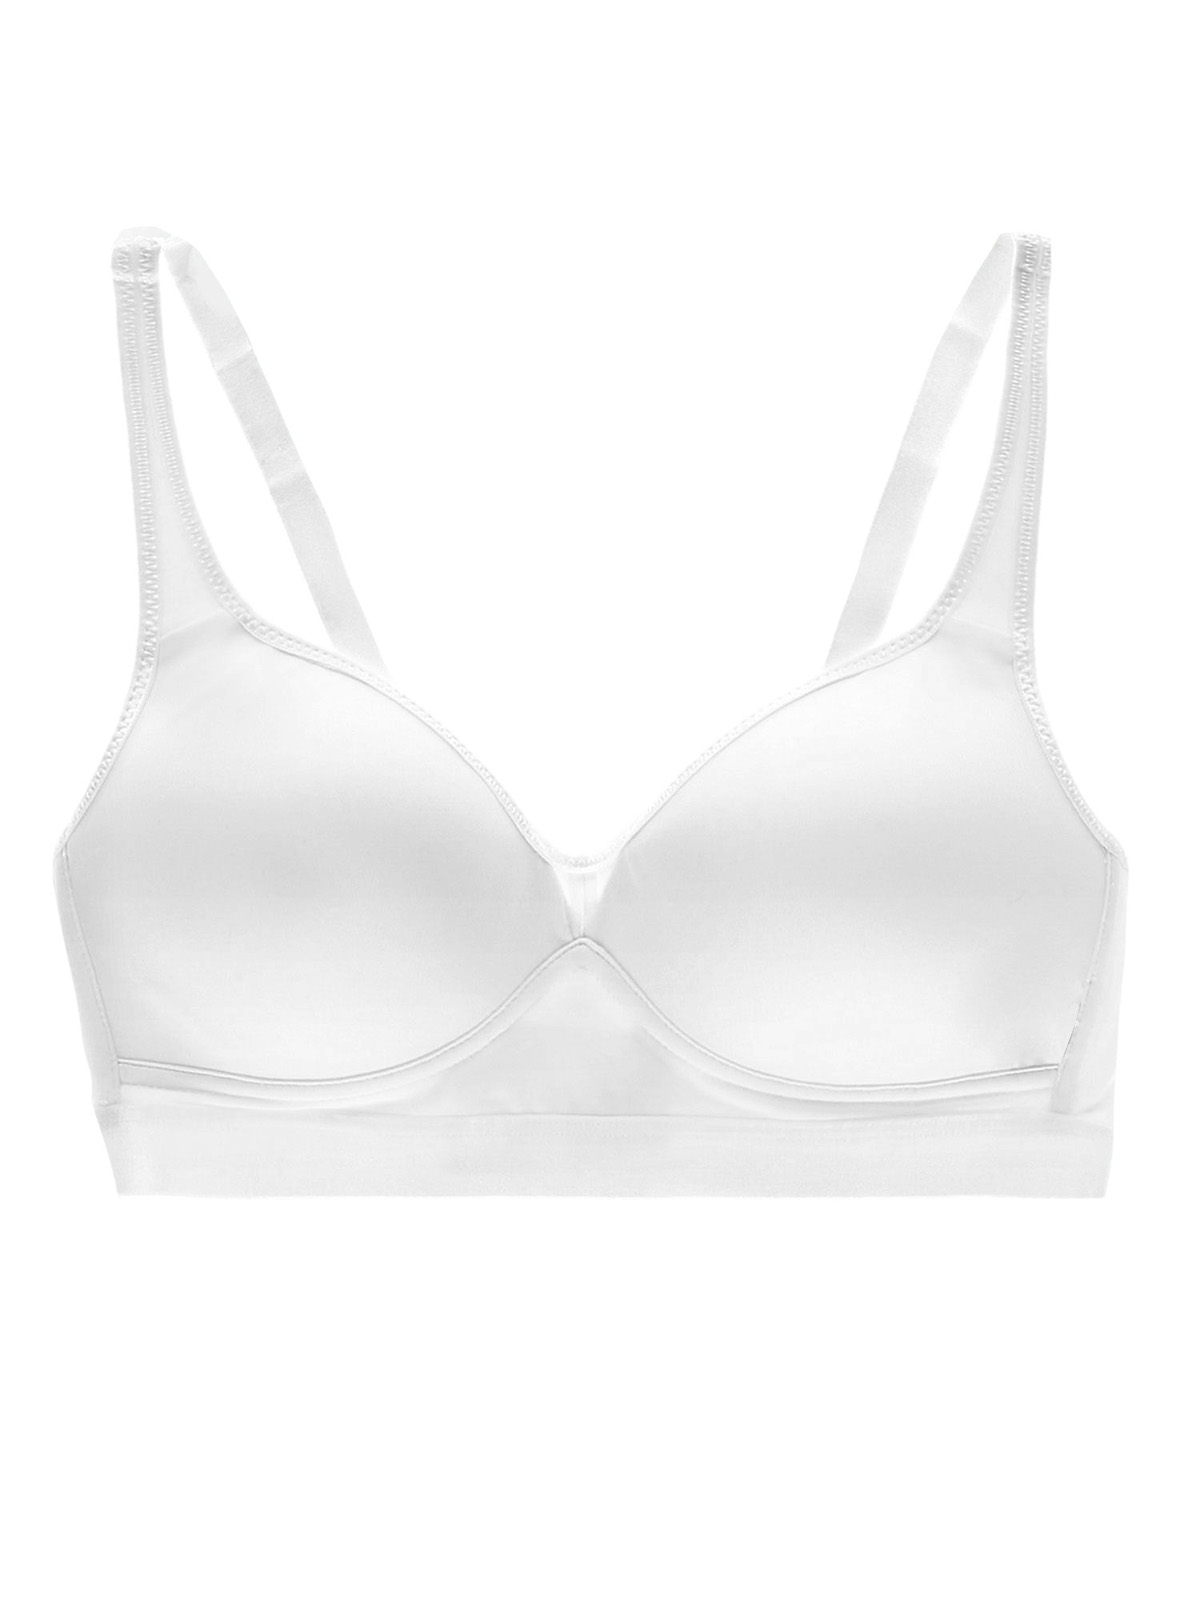 Marks and Spencer - - M&5 Angel WHITE Non-Wired First Sports Bra - Size ...